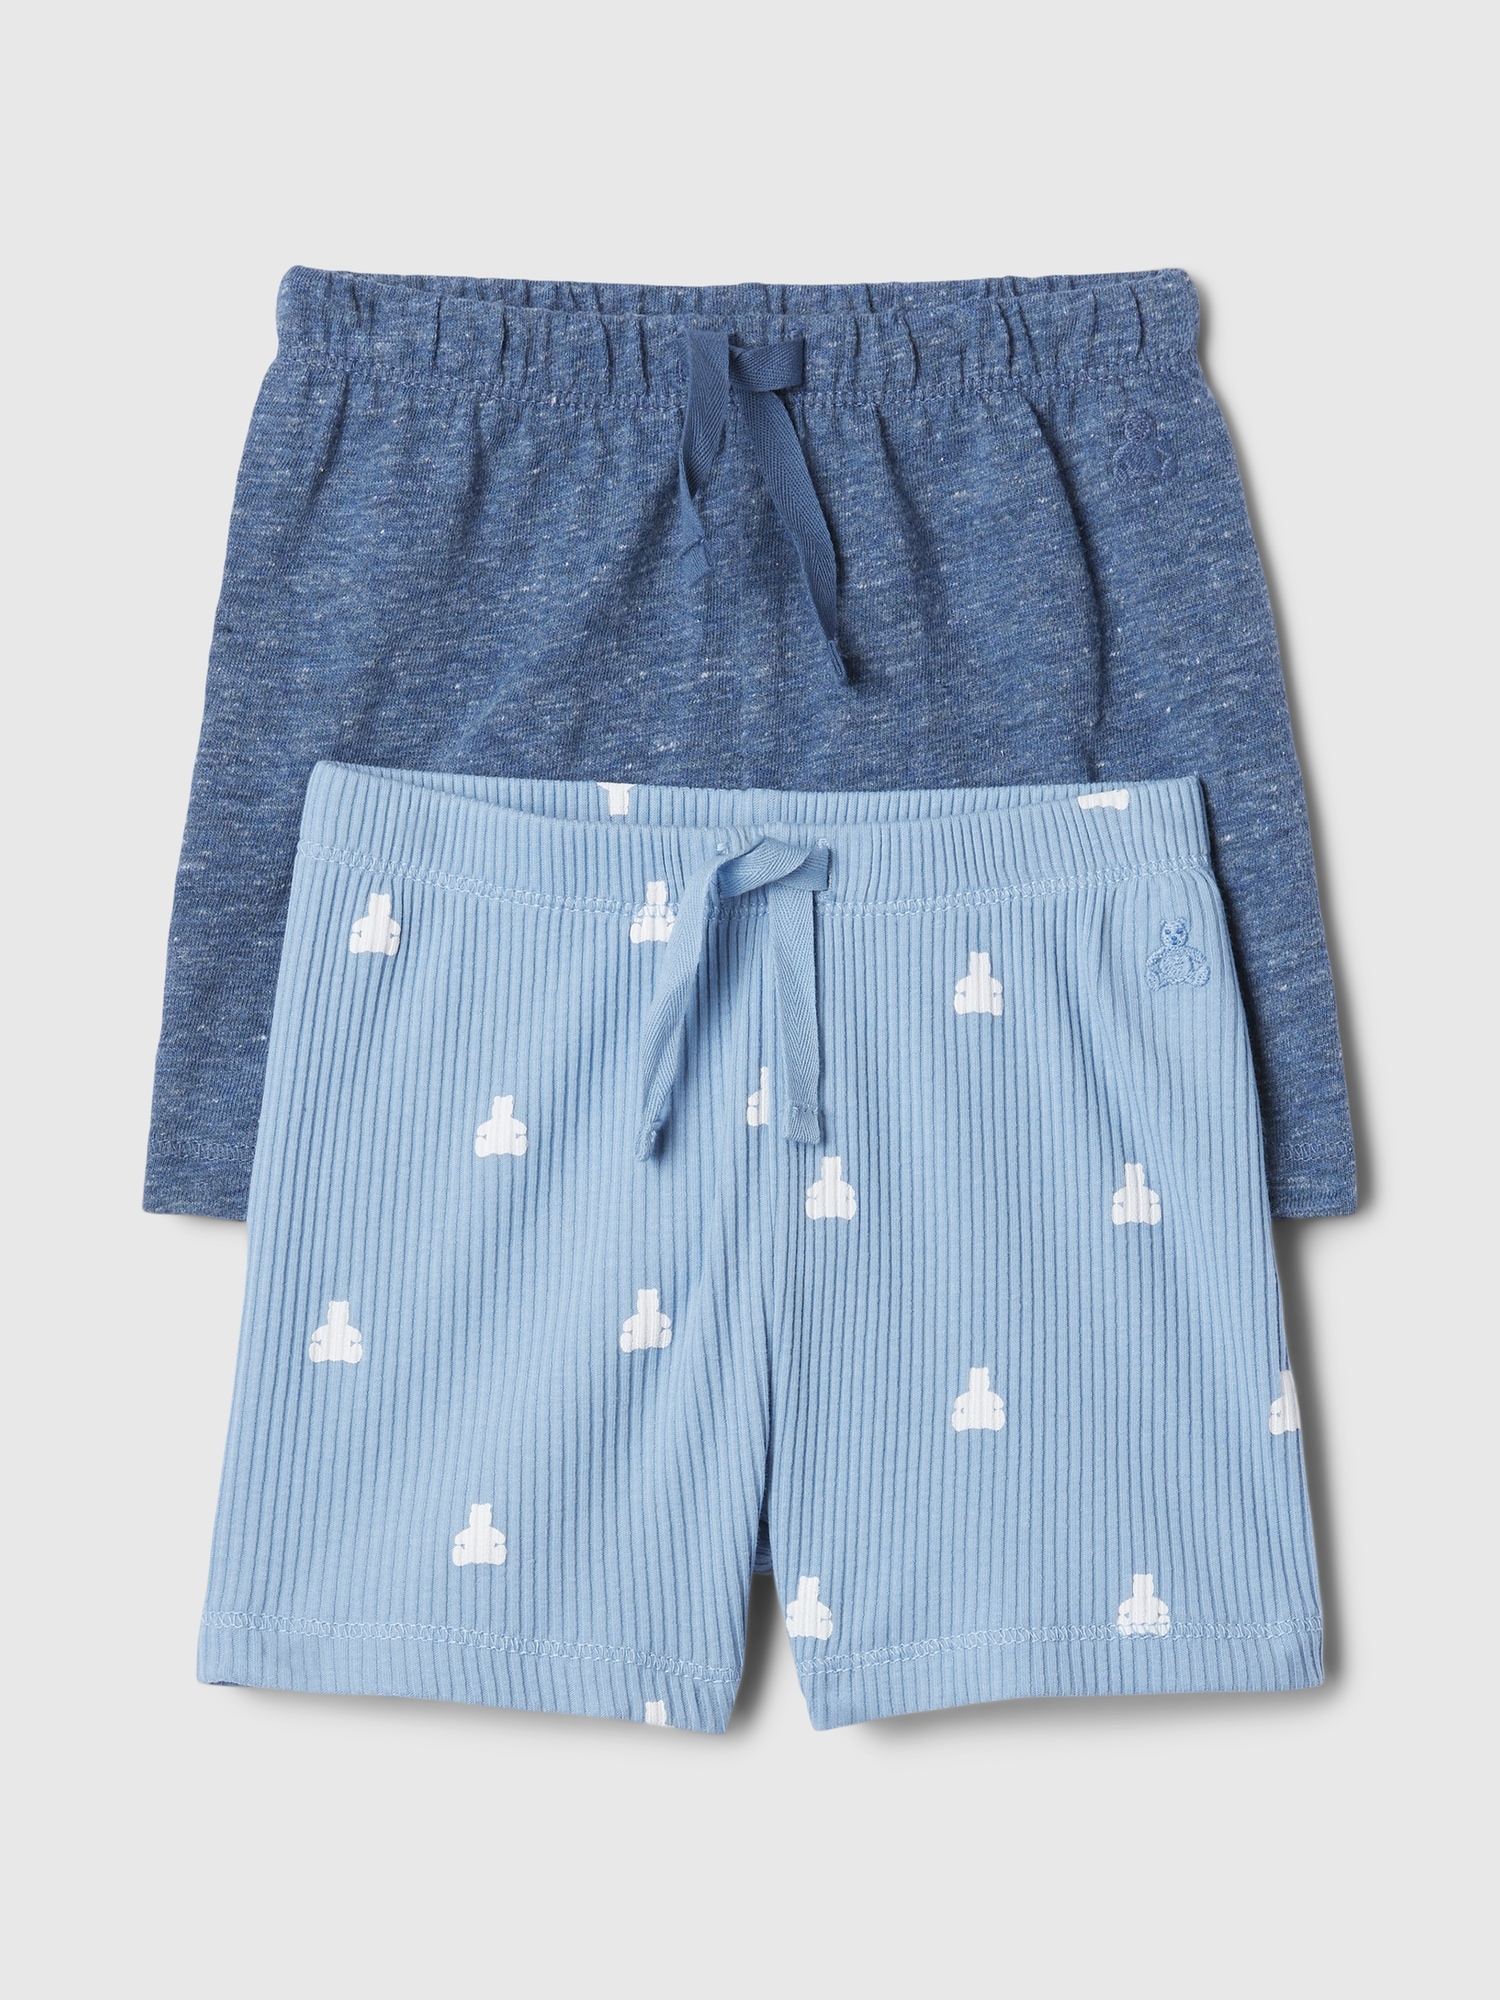 Baby First Favorites Pull-On Shorts (2-Pack)